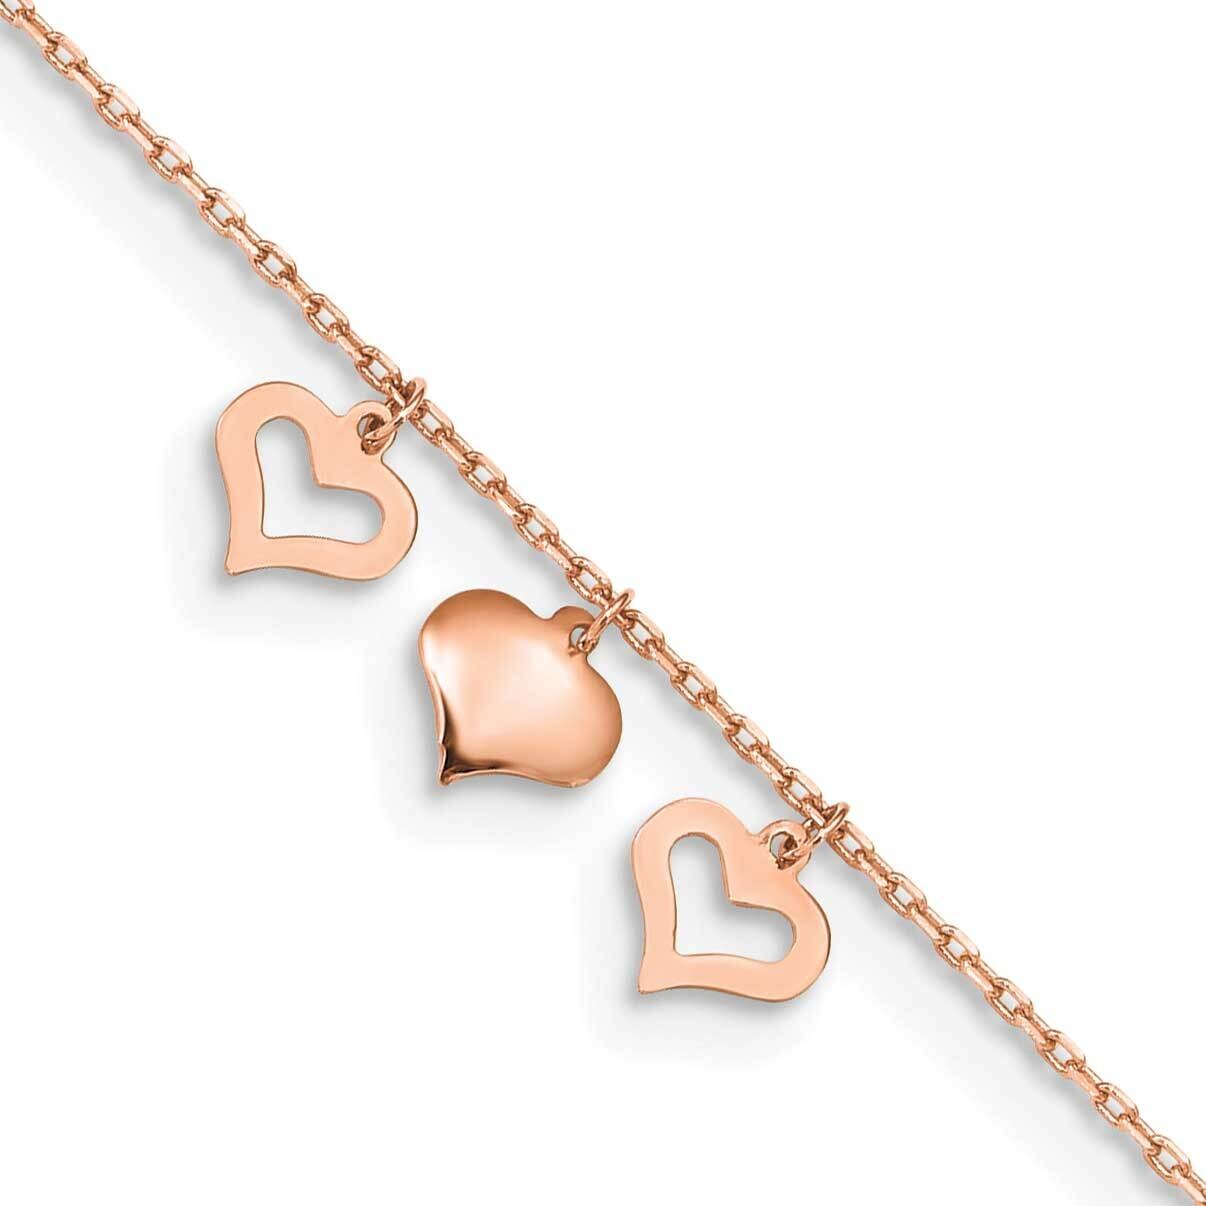 3 Hearts 9 Inch Plus 1 Inch Extension Anklet 14k Rose Gold ANK233R-10